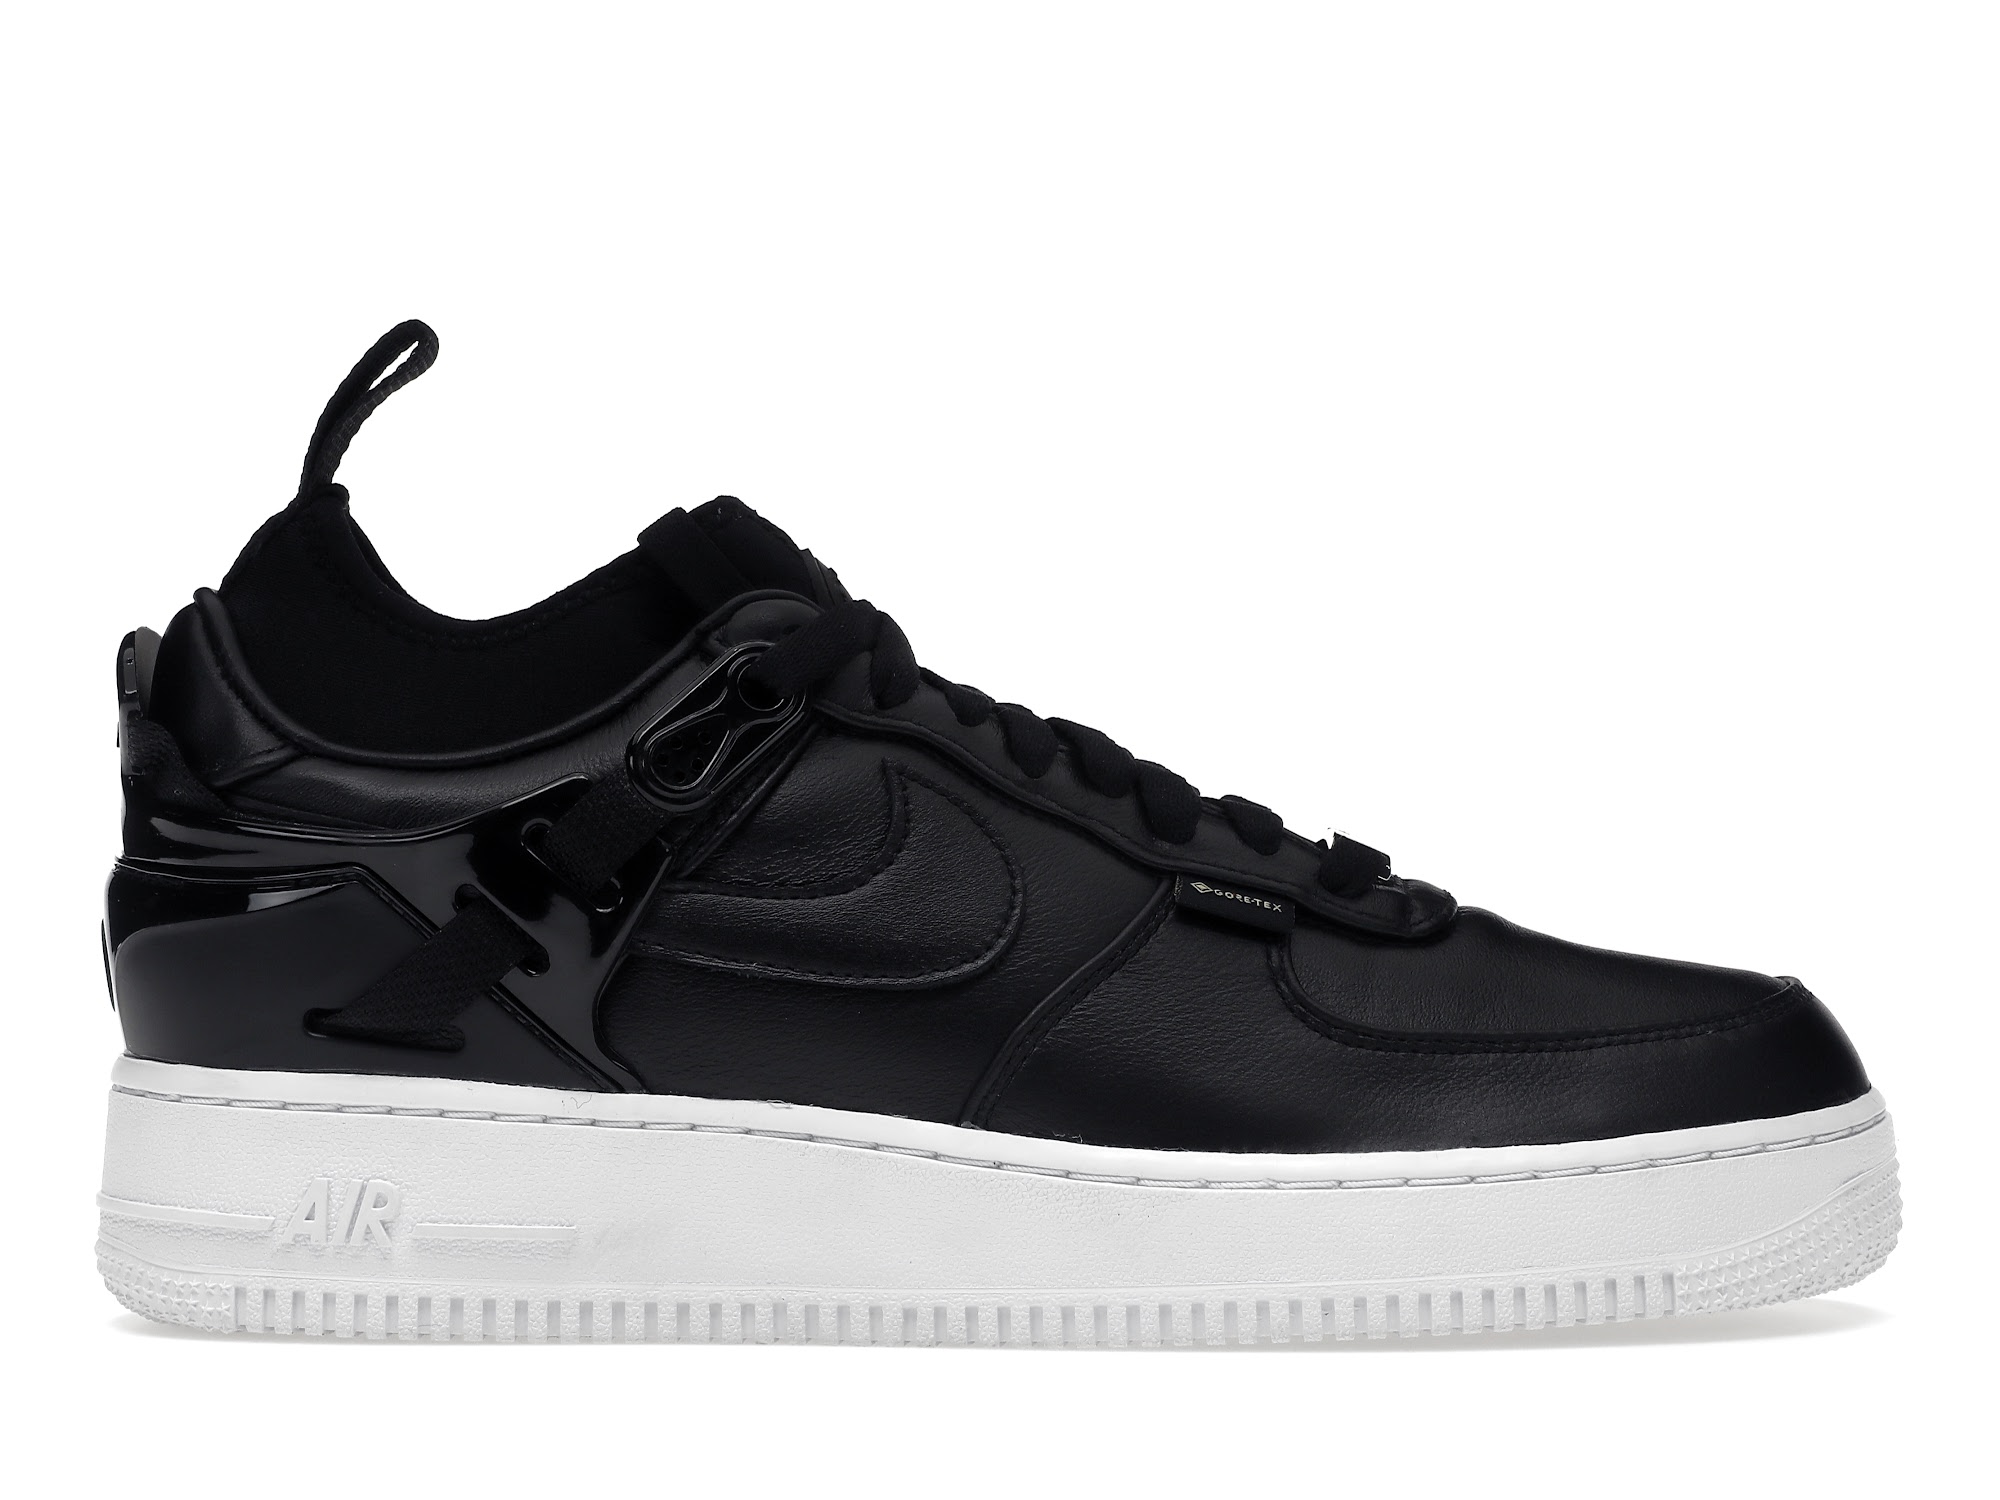 UNDERCOVER NIKE AIR FORCE 1 LOW | nate-hospital.com